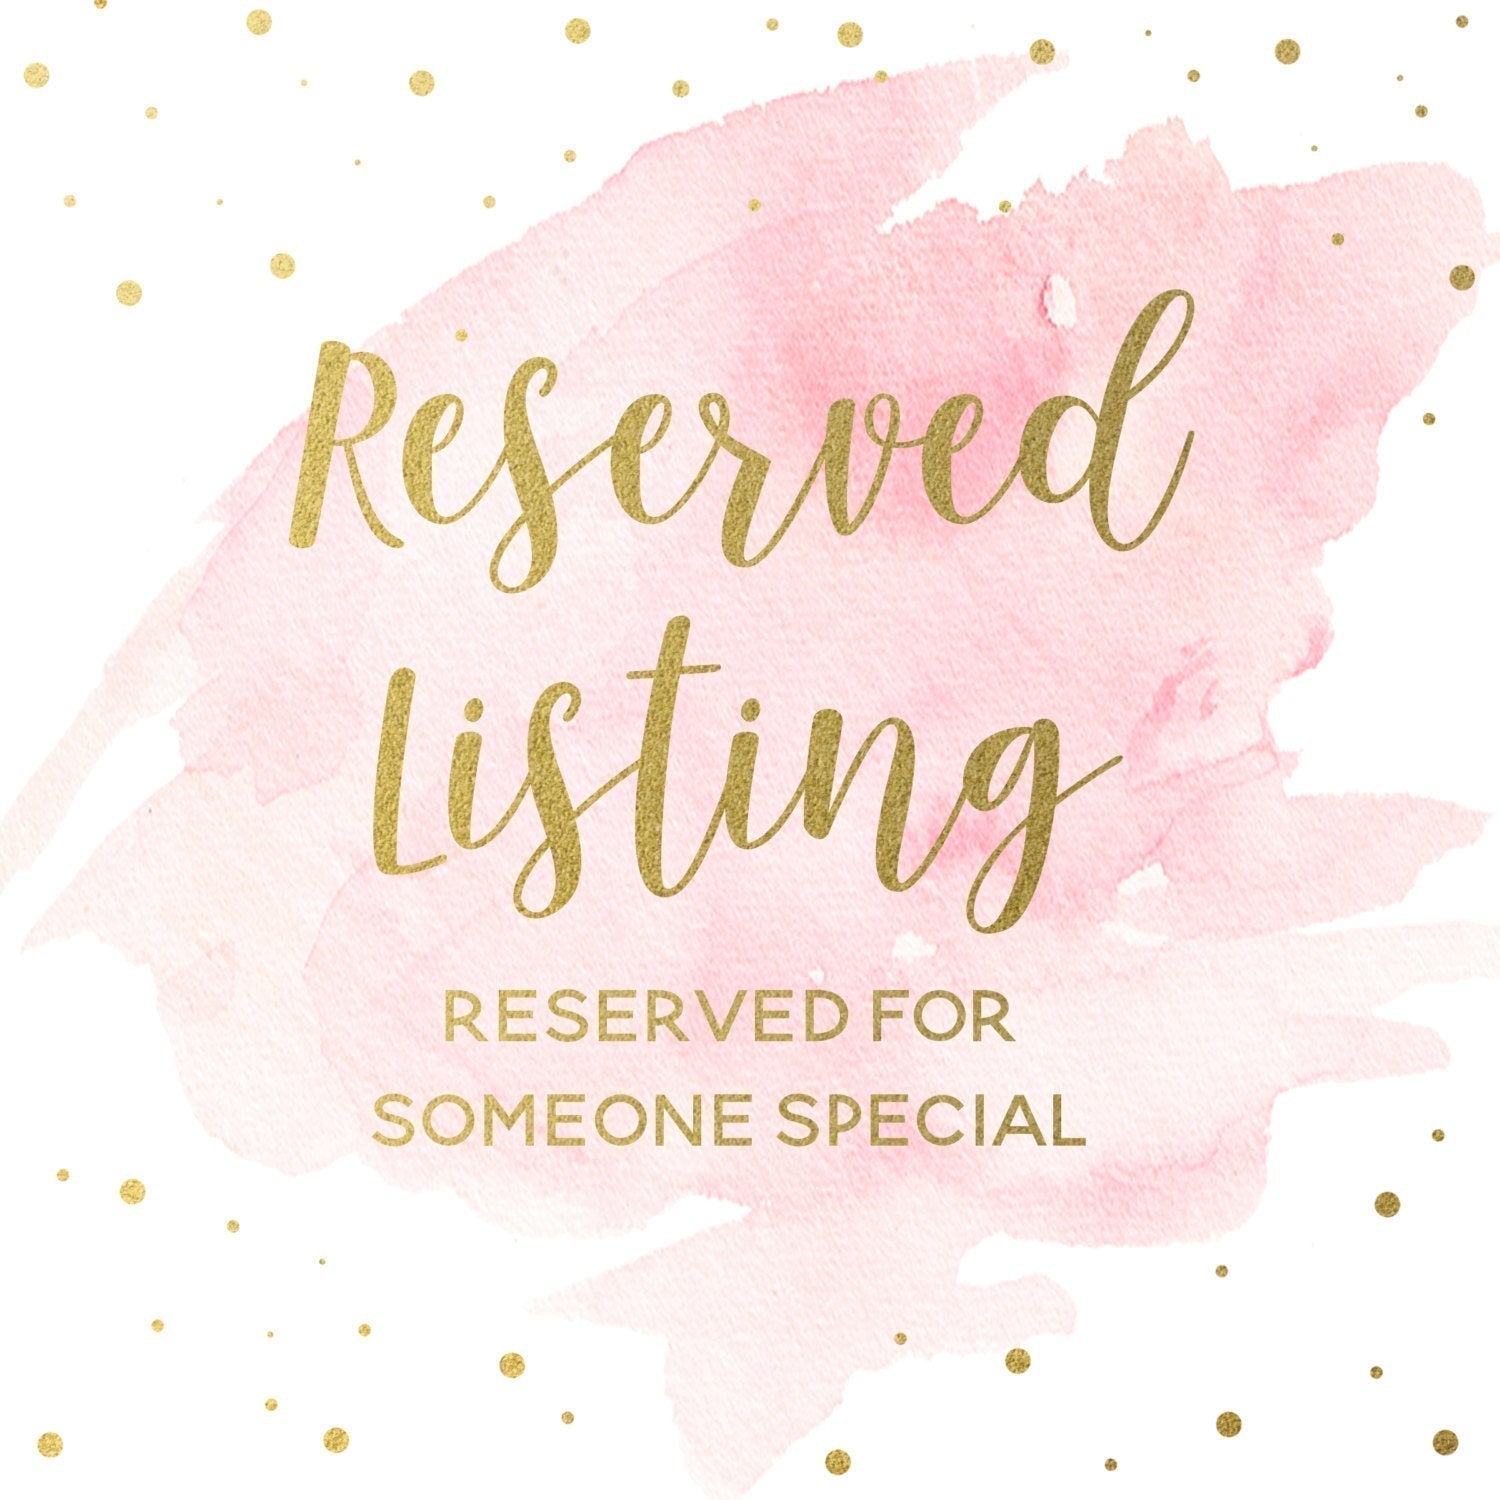 Reserved Listing - P Cole